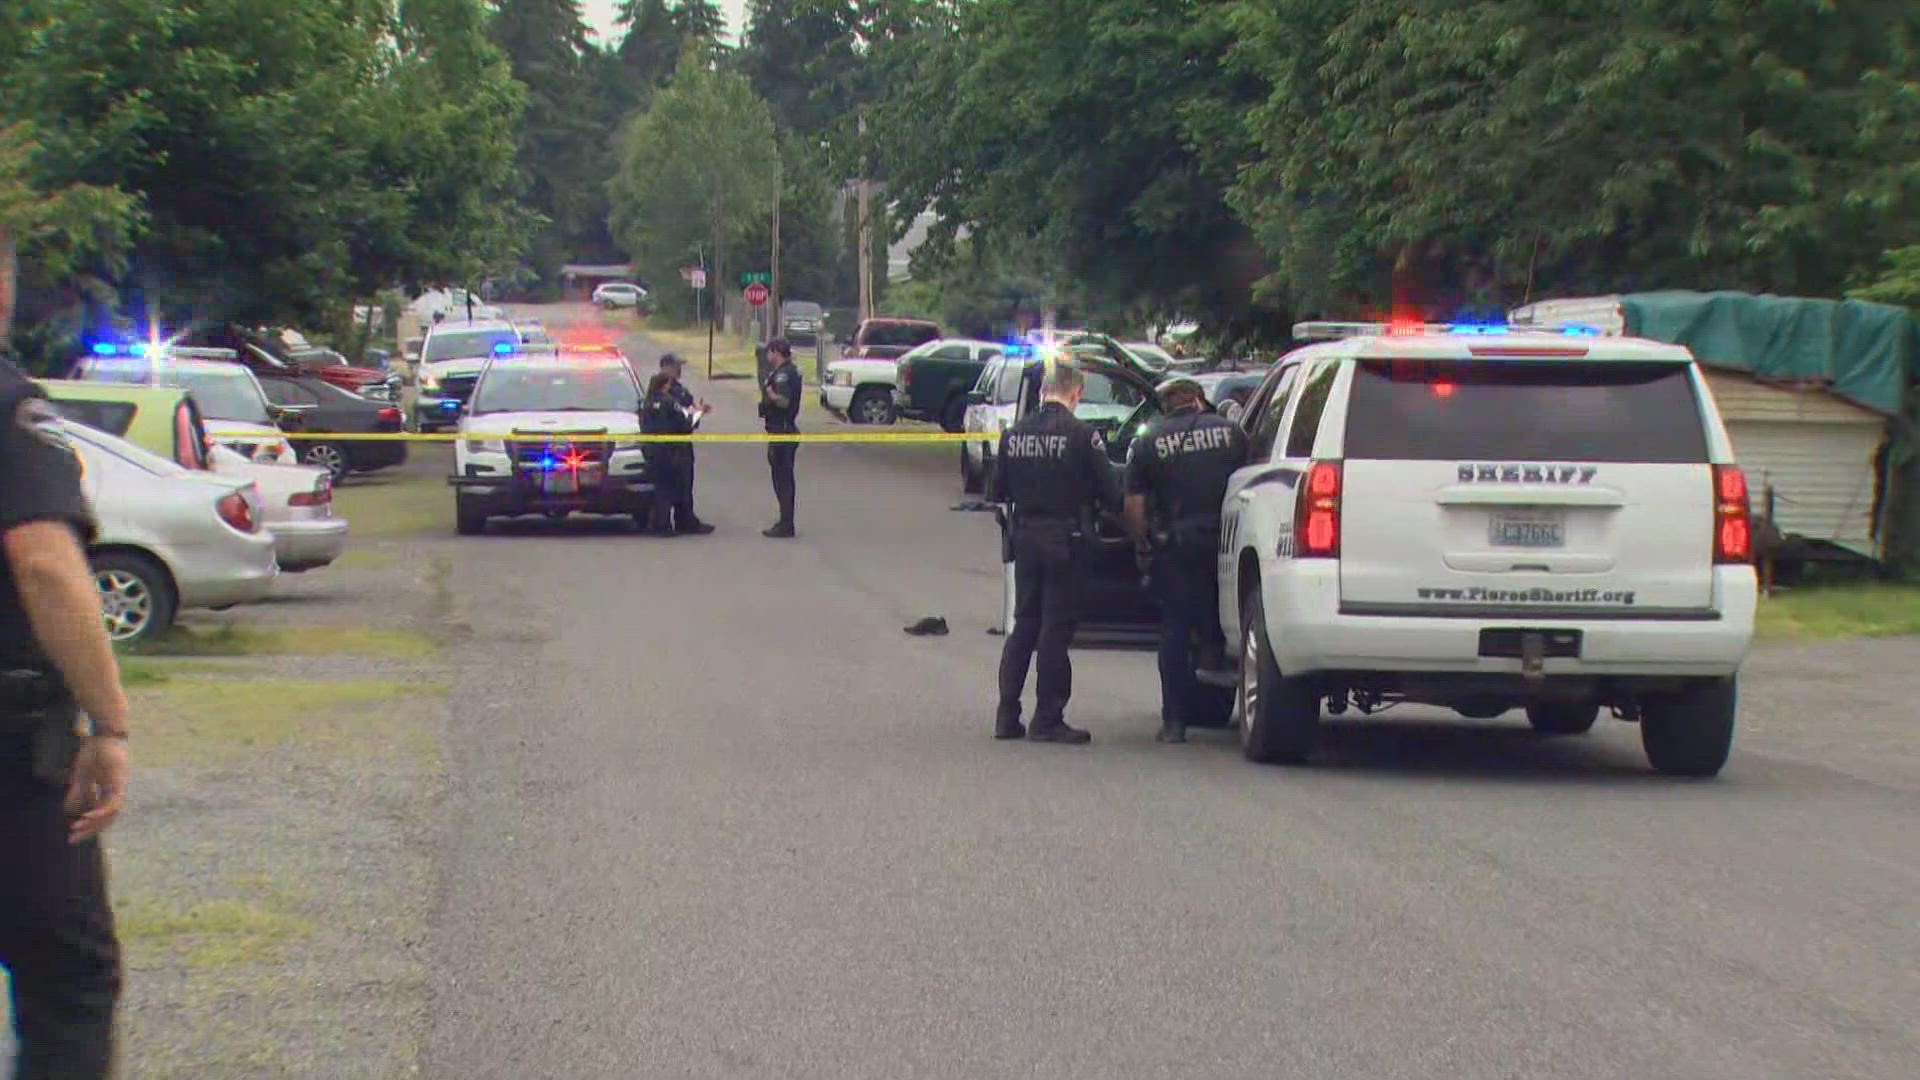 Pierce County deputies responded to a shooting in Parkland near the campus of Pacific Lutheran University